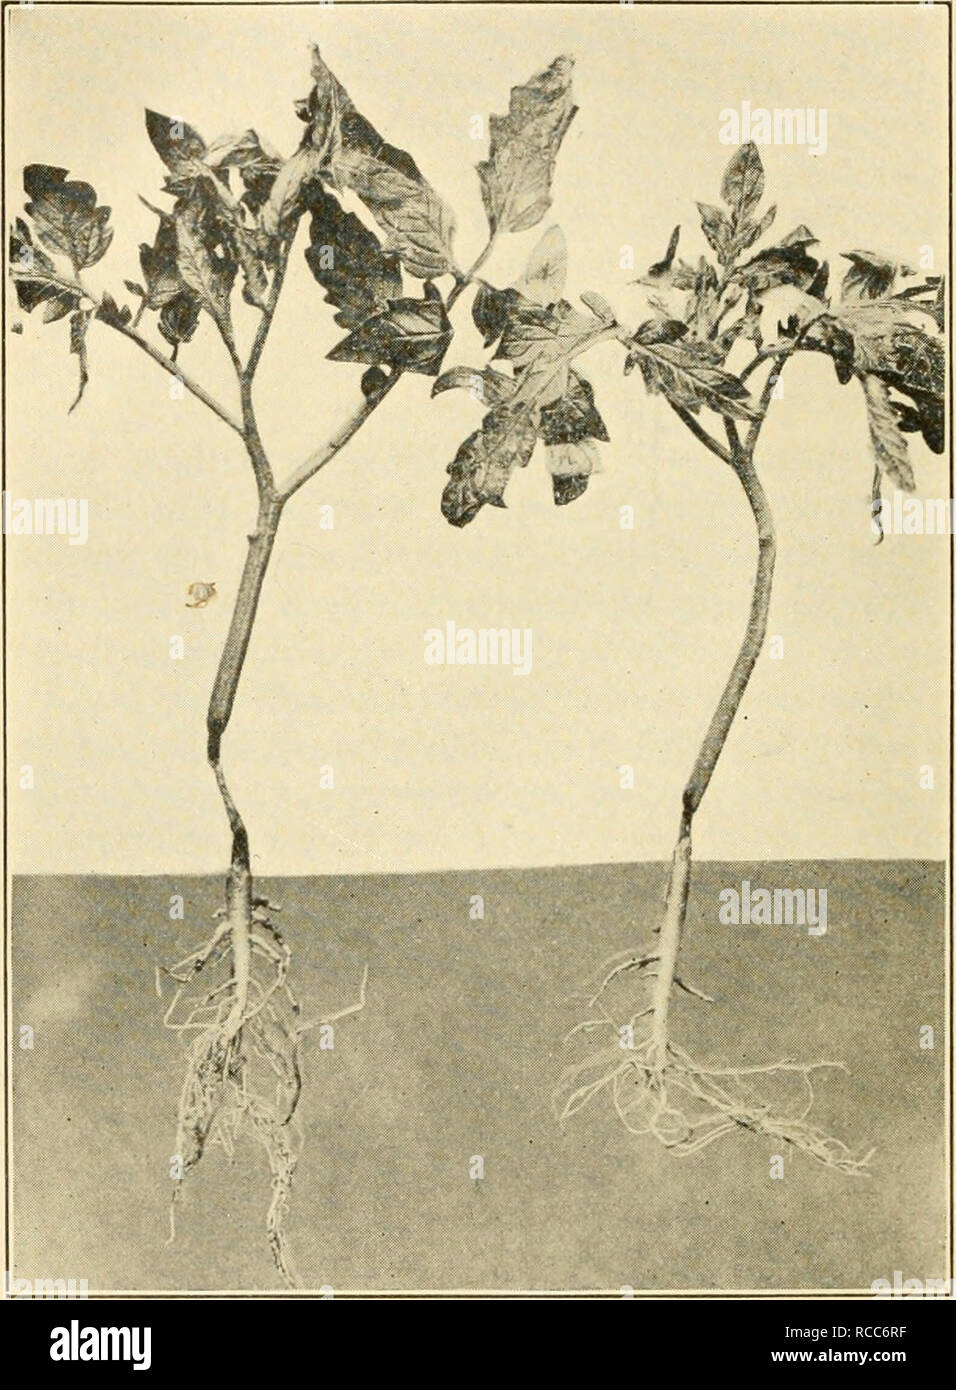 . Diseases of economic plants. Plant diseases. 20 Diseases of Economic Plants of fungi, prominent among them being Pythium, Thielavia, Corticium, Fusarium, Botiytis, Sclerotinia, Sclerotium, Phoma, Volutella, Phytophthora, Colletotrichuin, Gloeospo-. FiG. 4. — Stems of young greenhouse tomato plants damped- off frcm attacks of Corticium. After Humbert. rium. The fungus which causes this condition maj^ often be seen as a weft of mycehum around the base of the diseased plant, or even creeping over the ground to some distance.. Please note that these images are extracted from scanned page images  Stock Photo